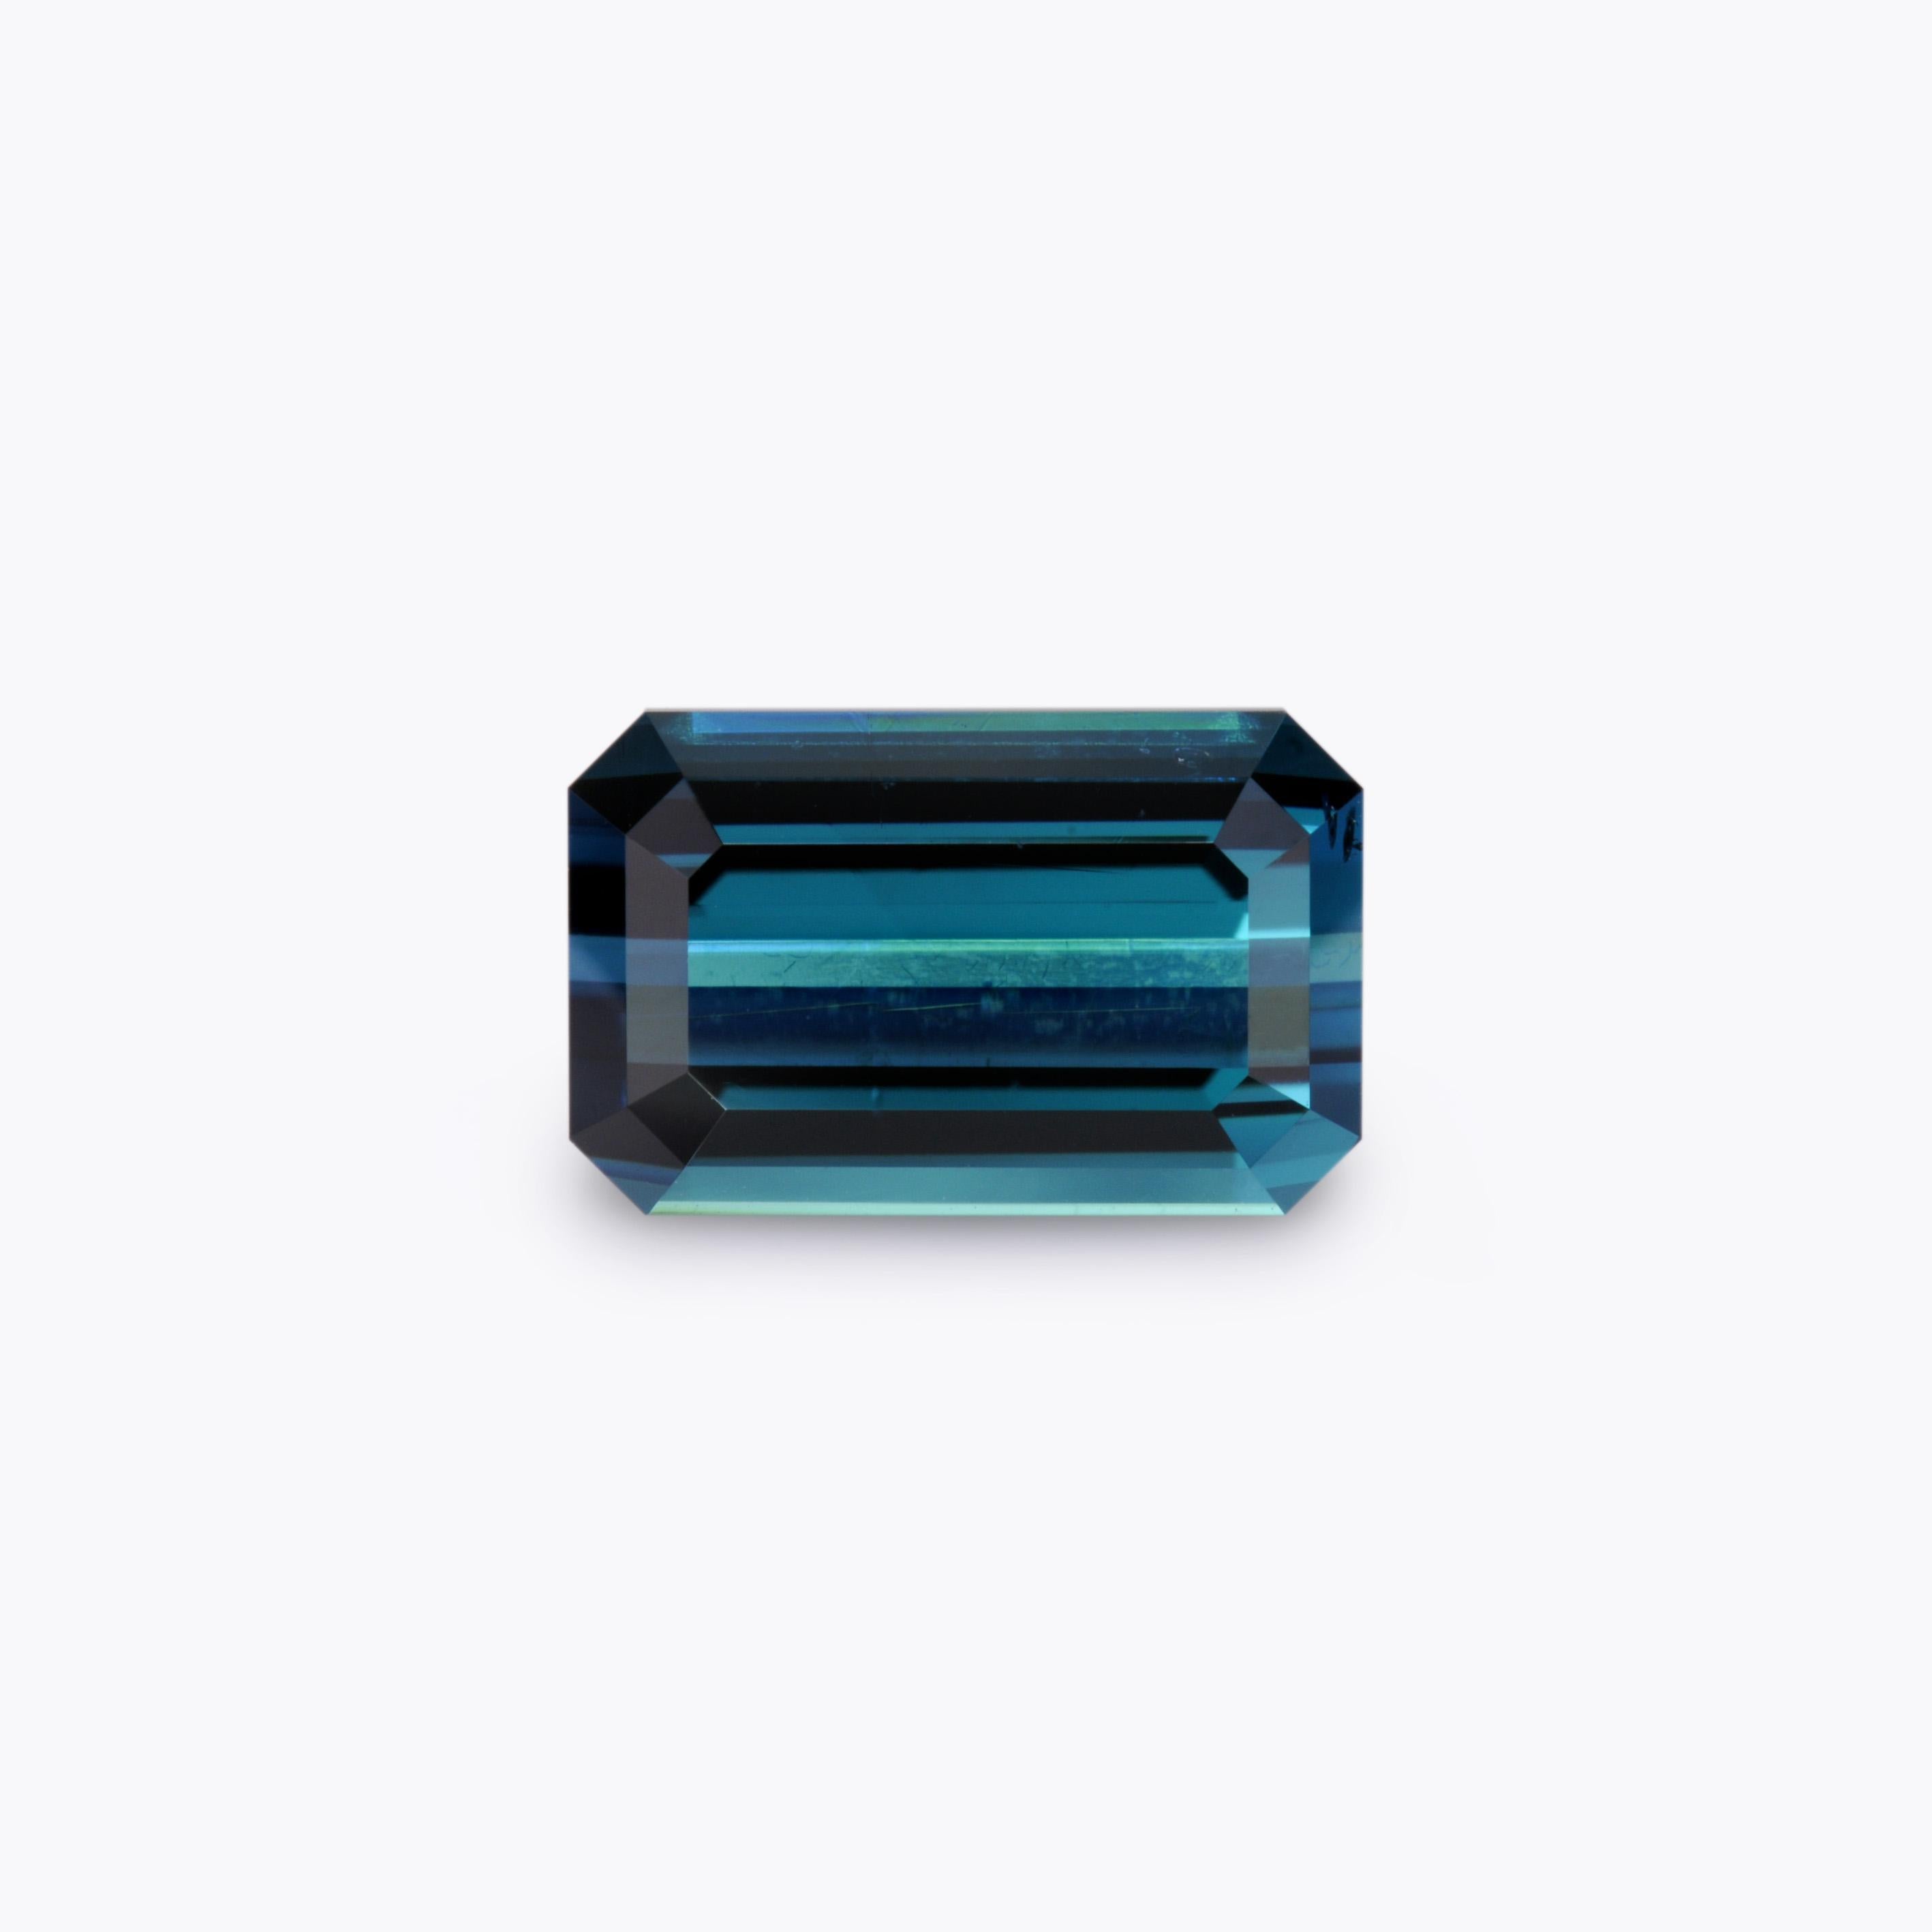 Captivating 5.23 carat Indicolite Tourmaline emerald-cut loose gemstone, offered unmounted to a fine gem connoisseur.
Returns are accepted and paid by us within 7 days of delivery.
We offer supreme custom jewelry work upon request. Please contact us